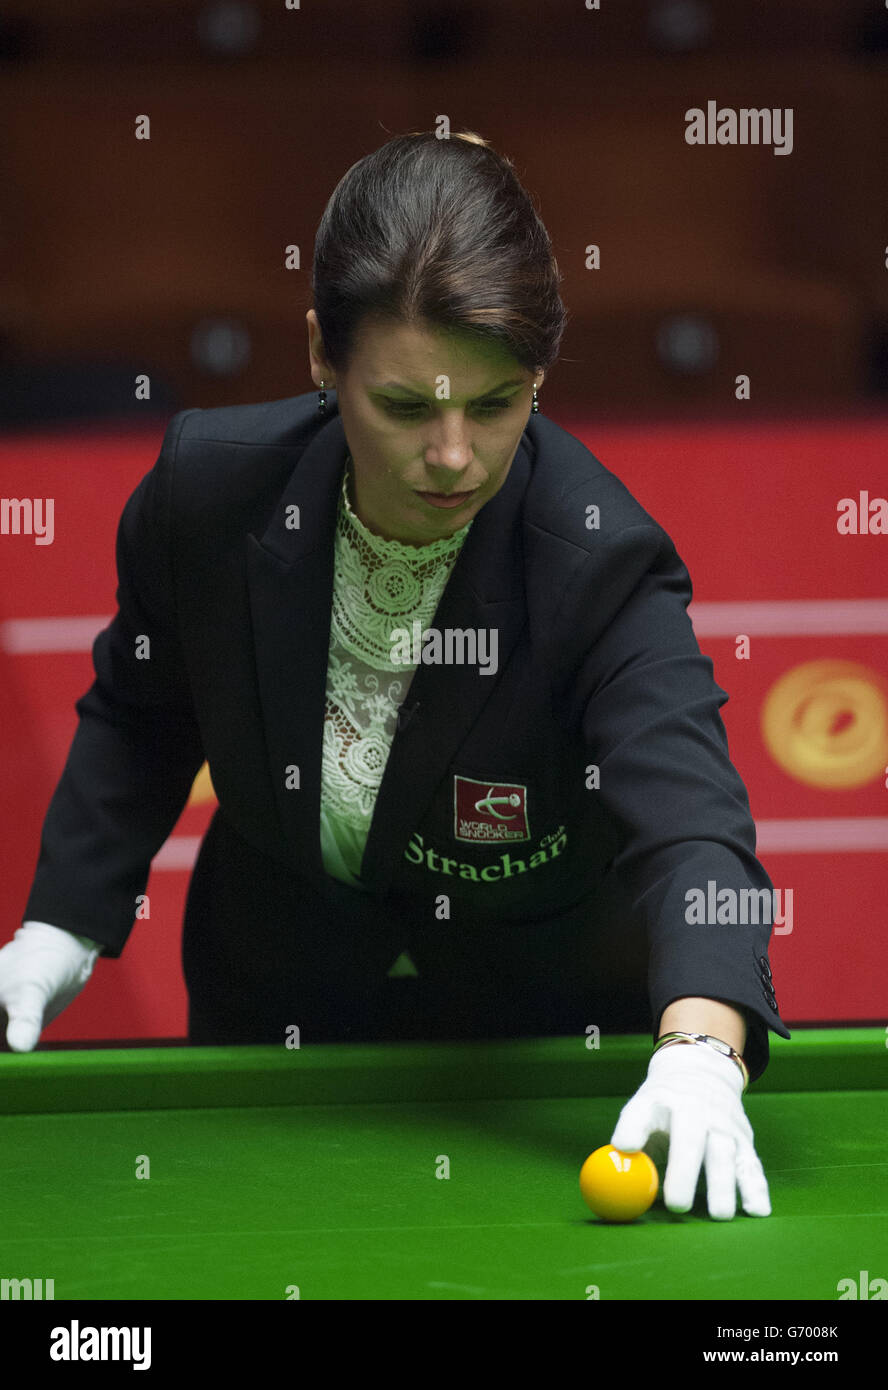 Snooker - Dafabet World Snooker Championships - Day Four - The Crucible. Referee Michaela Tabb during the Dafabet World Snooker Championships at The Crucible, Sheffield. Stock Photo